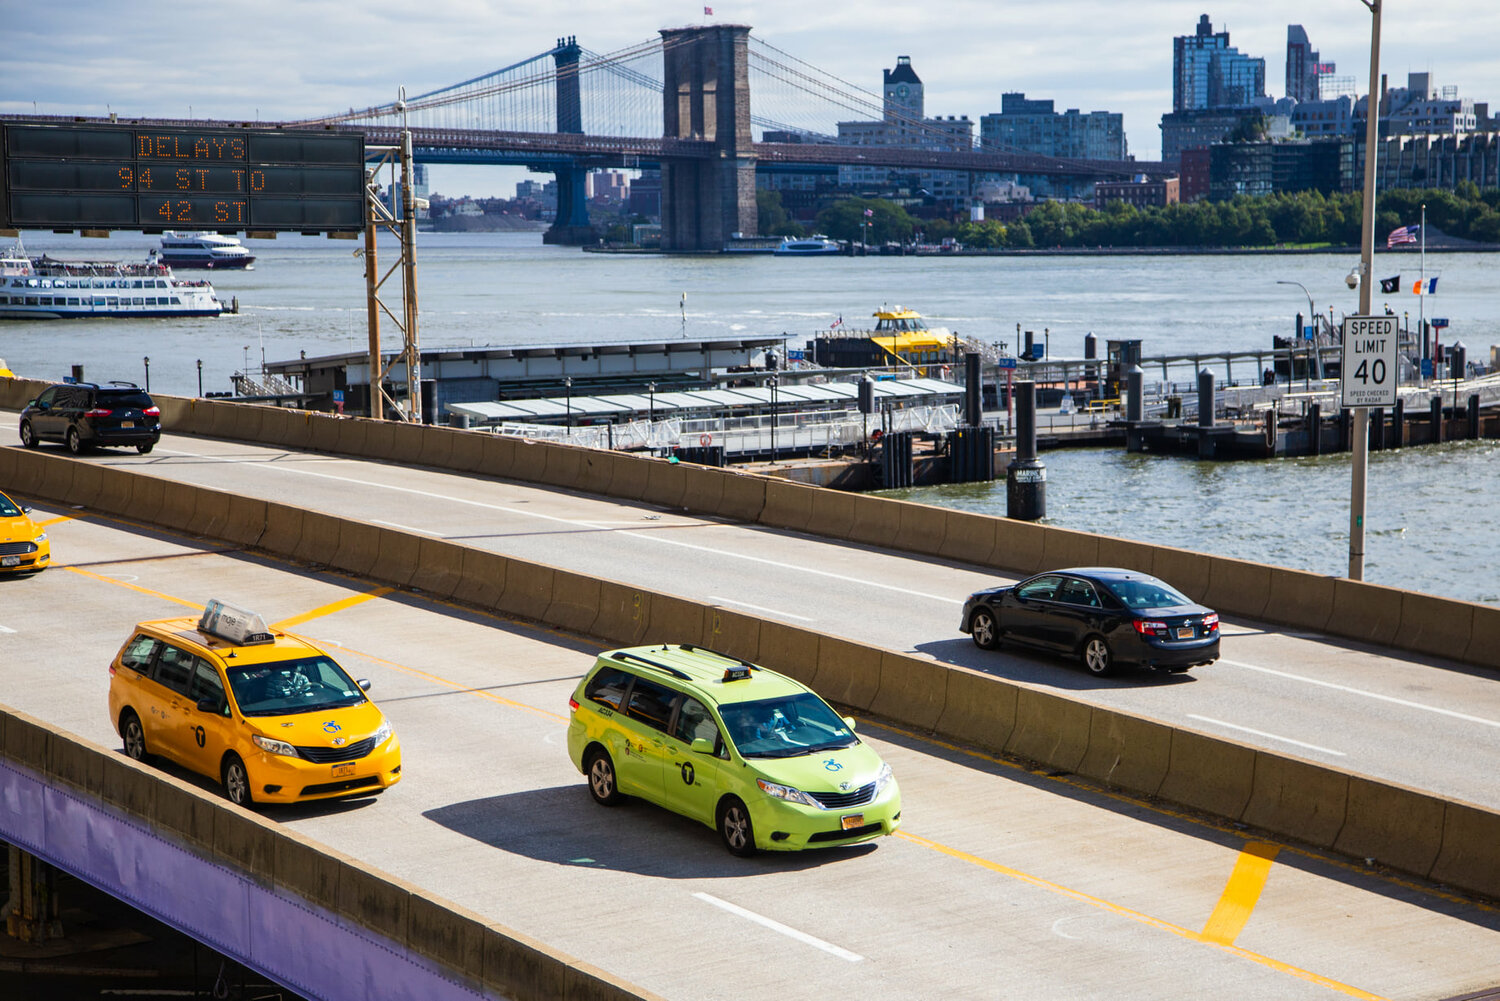 The number of so-called boro cabs cruising city streets dropped nearly 18 percent in the 12-month period ending in February. The city’s Taxi and Limousine Commission is looking to bolster the availability of apple-green cabs, which can only pick up in the outer boroughs and northern Manhattan, by adding 2,500 no-hail vehicles in those areas. The union representing drivers has filed suit to stop the pilot program.